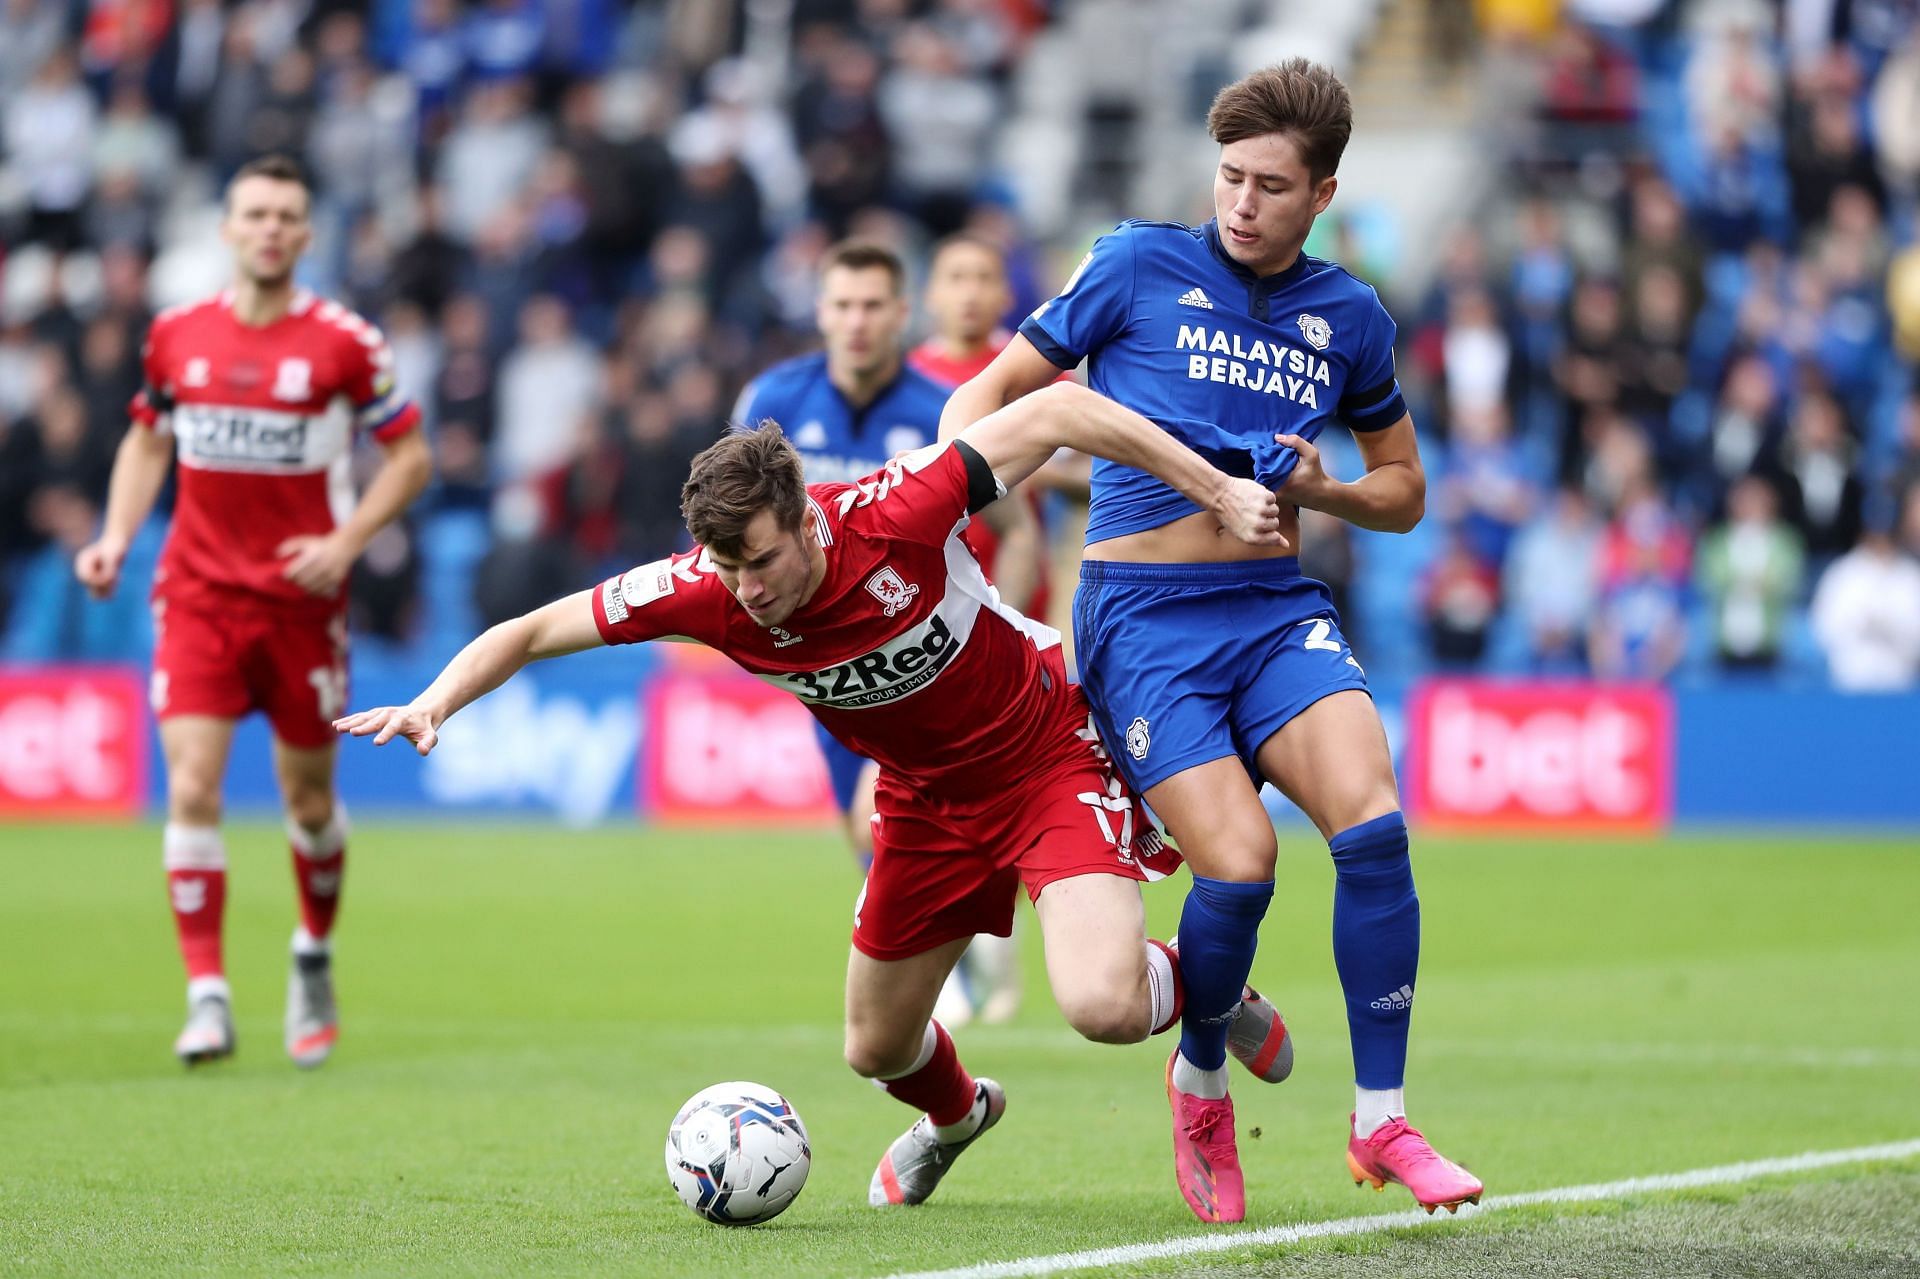 Middlesbrough vs Cardiff City Prediction and Betting Tips